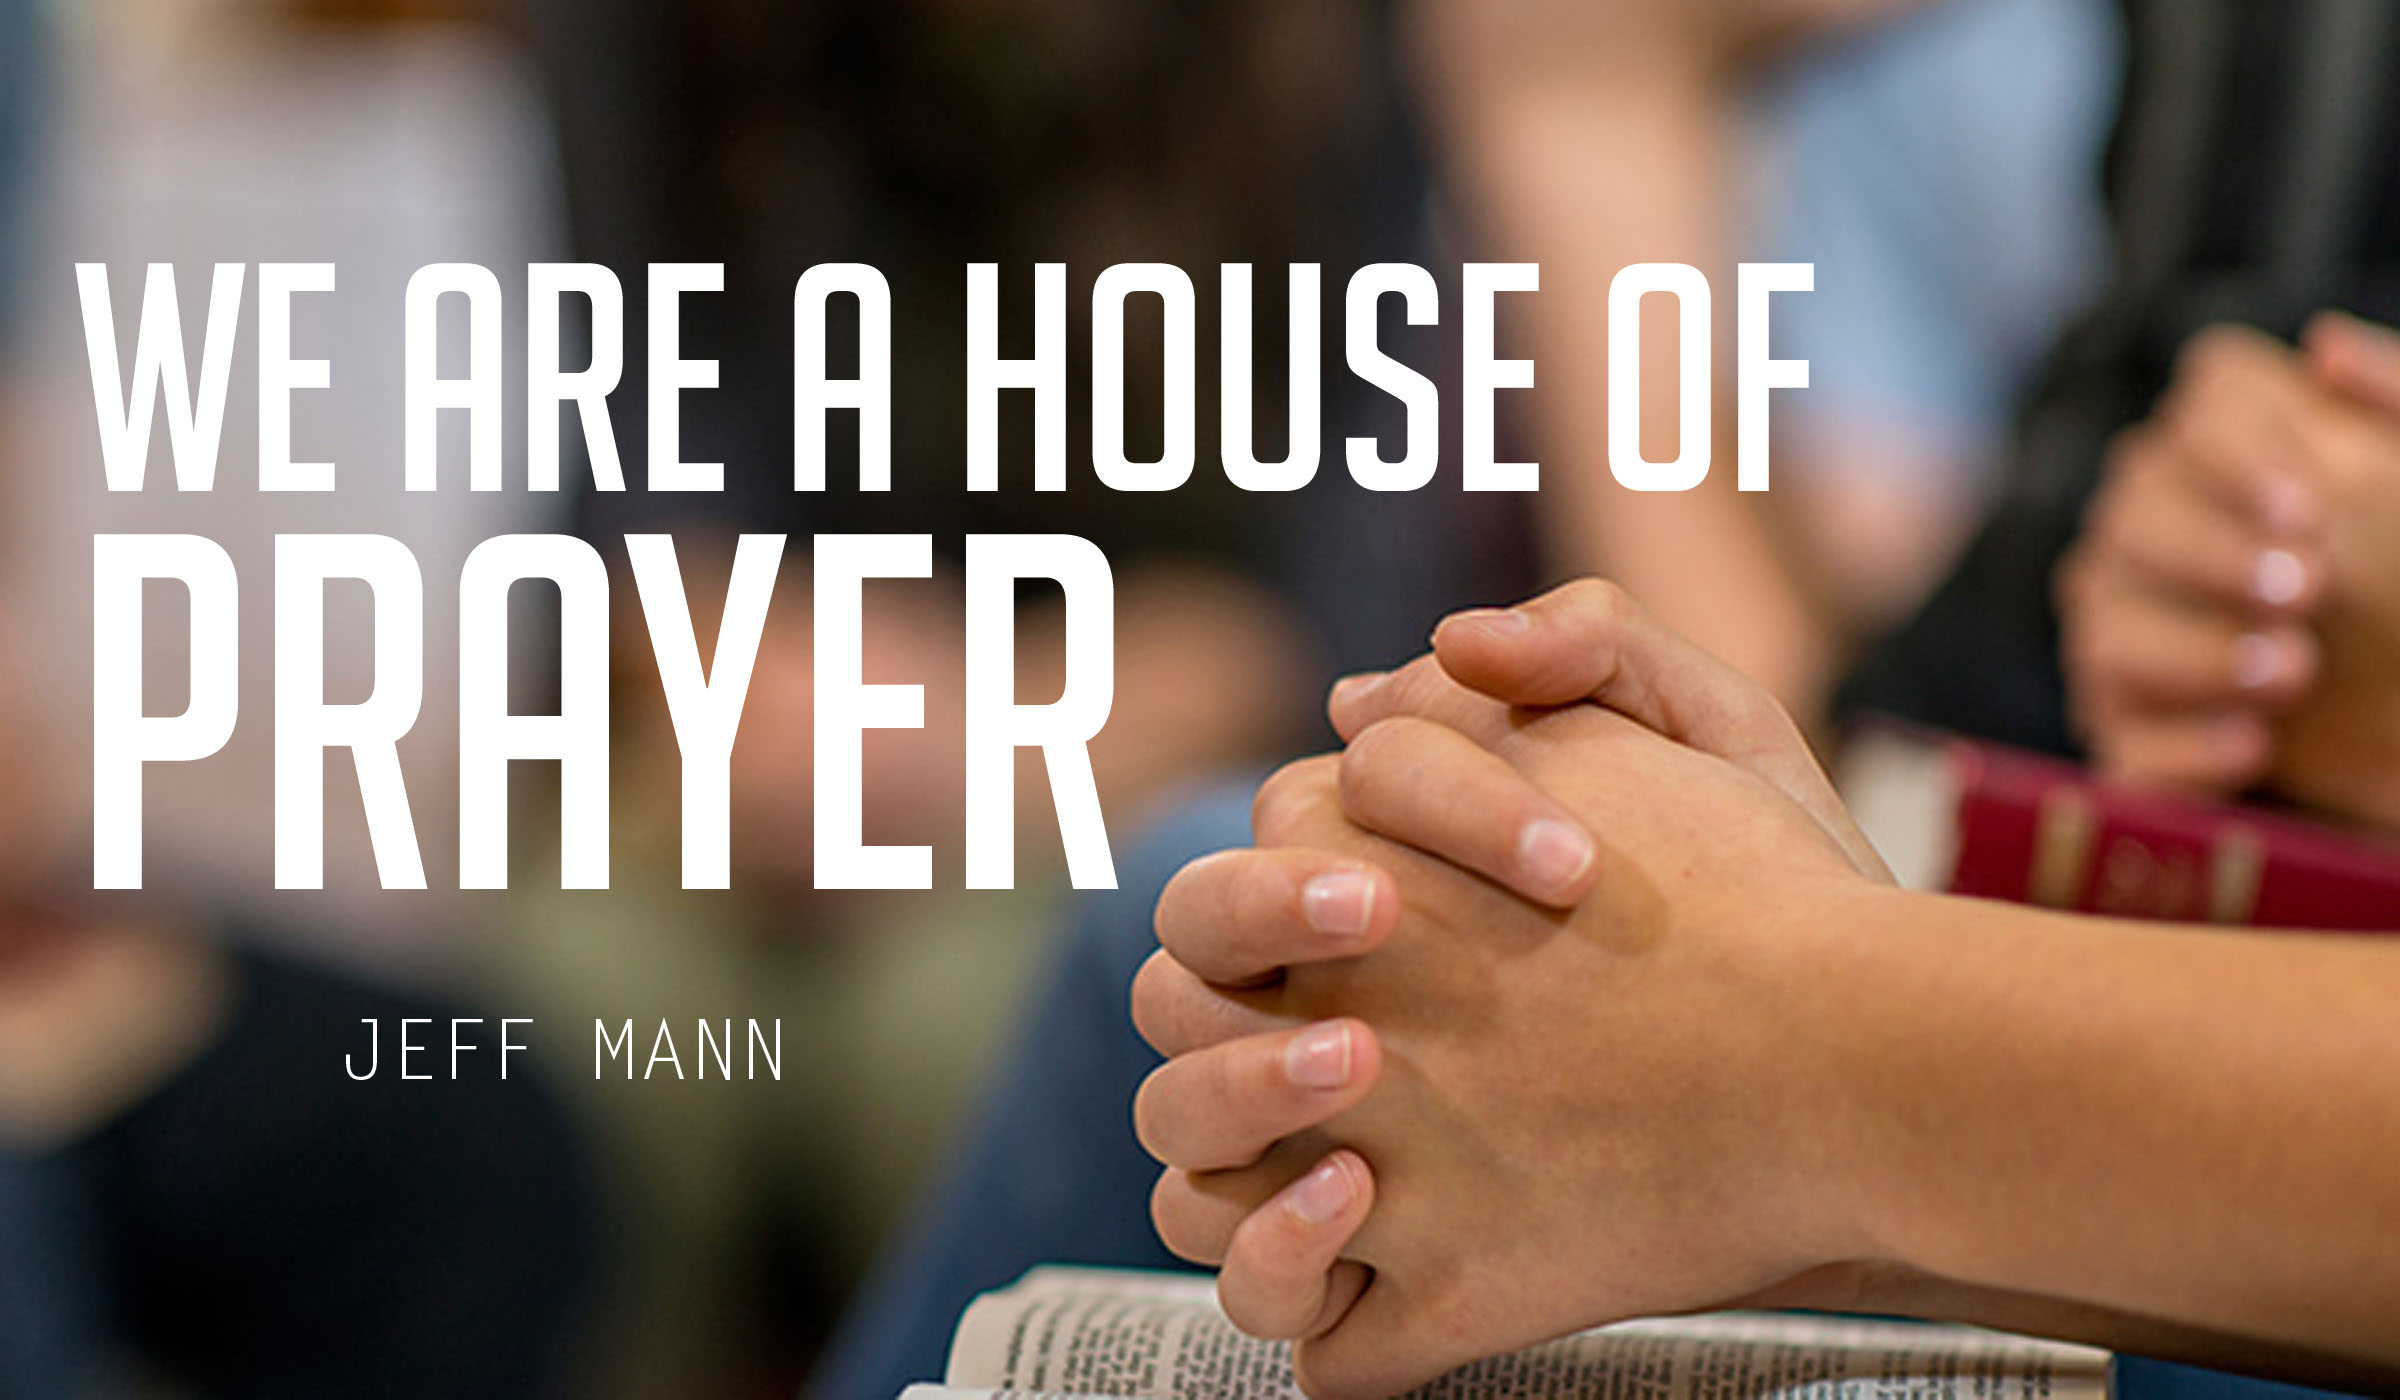 We are a House of Prayer